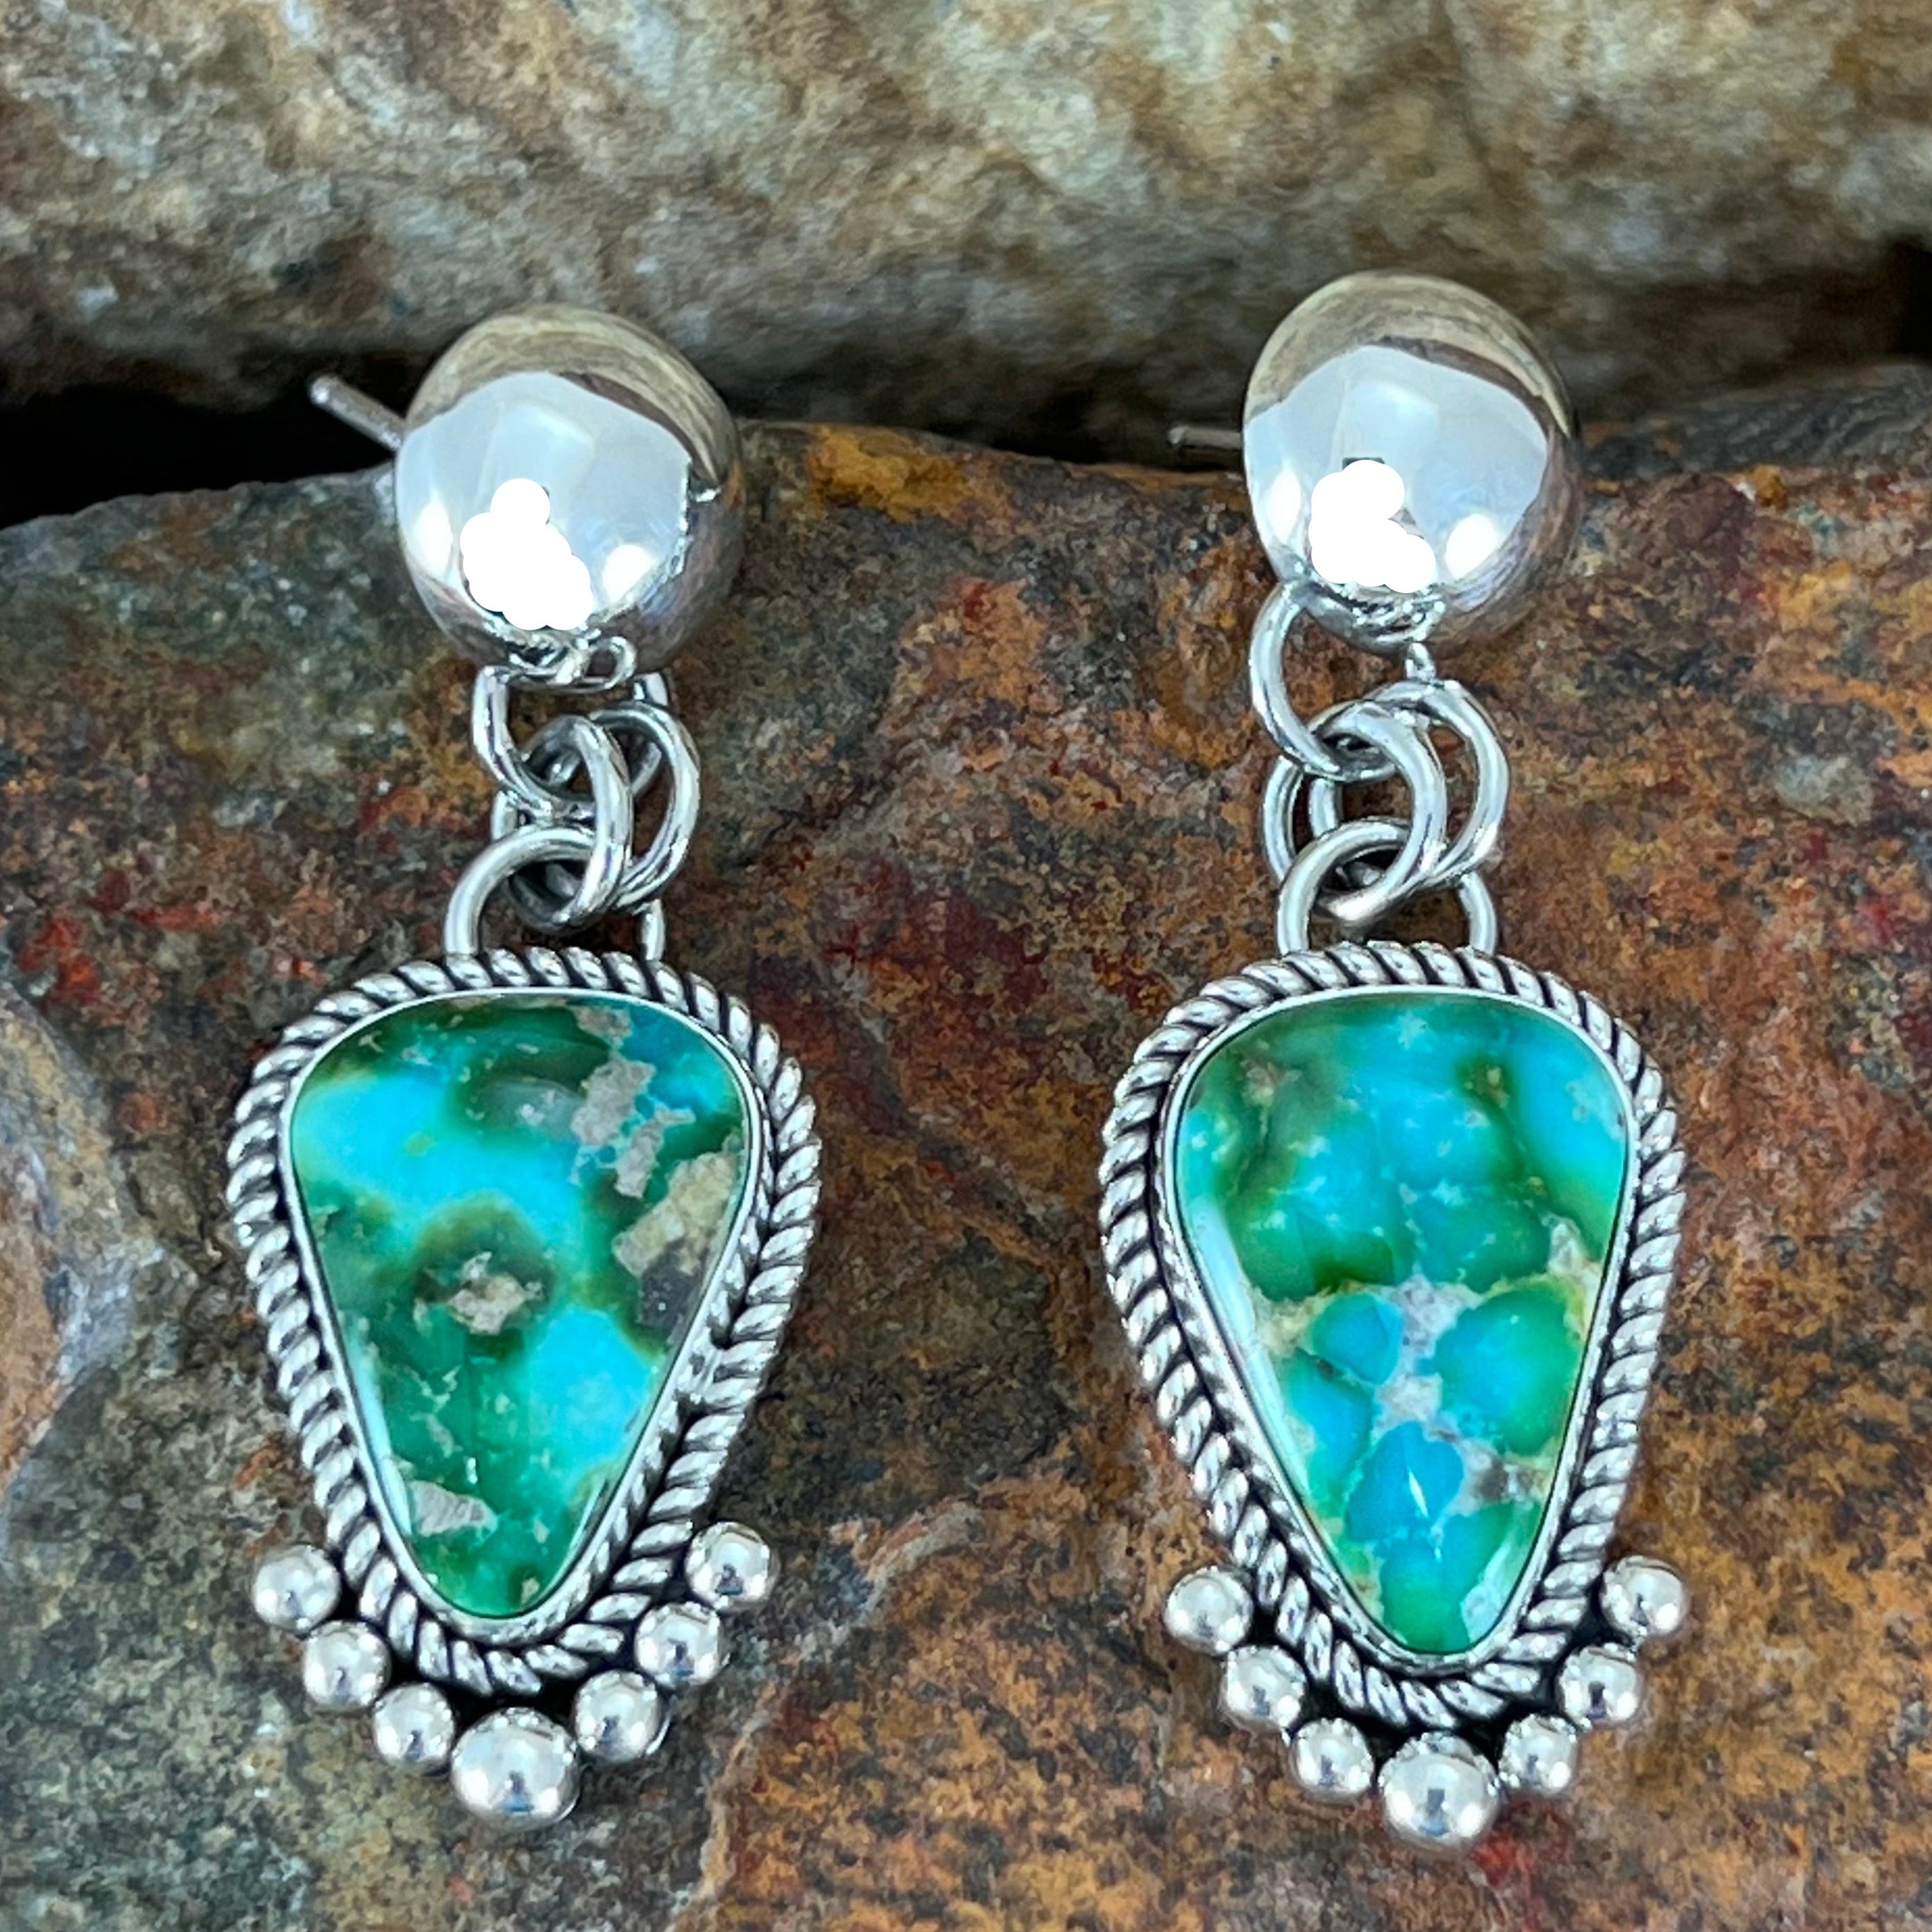 Sonoran Mountain Turquoise Hoop Earrings – Mad Made Metals